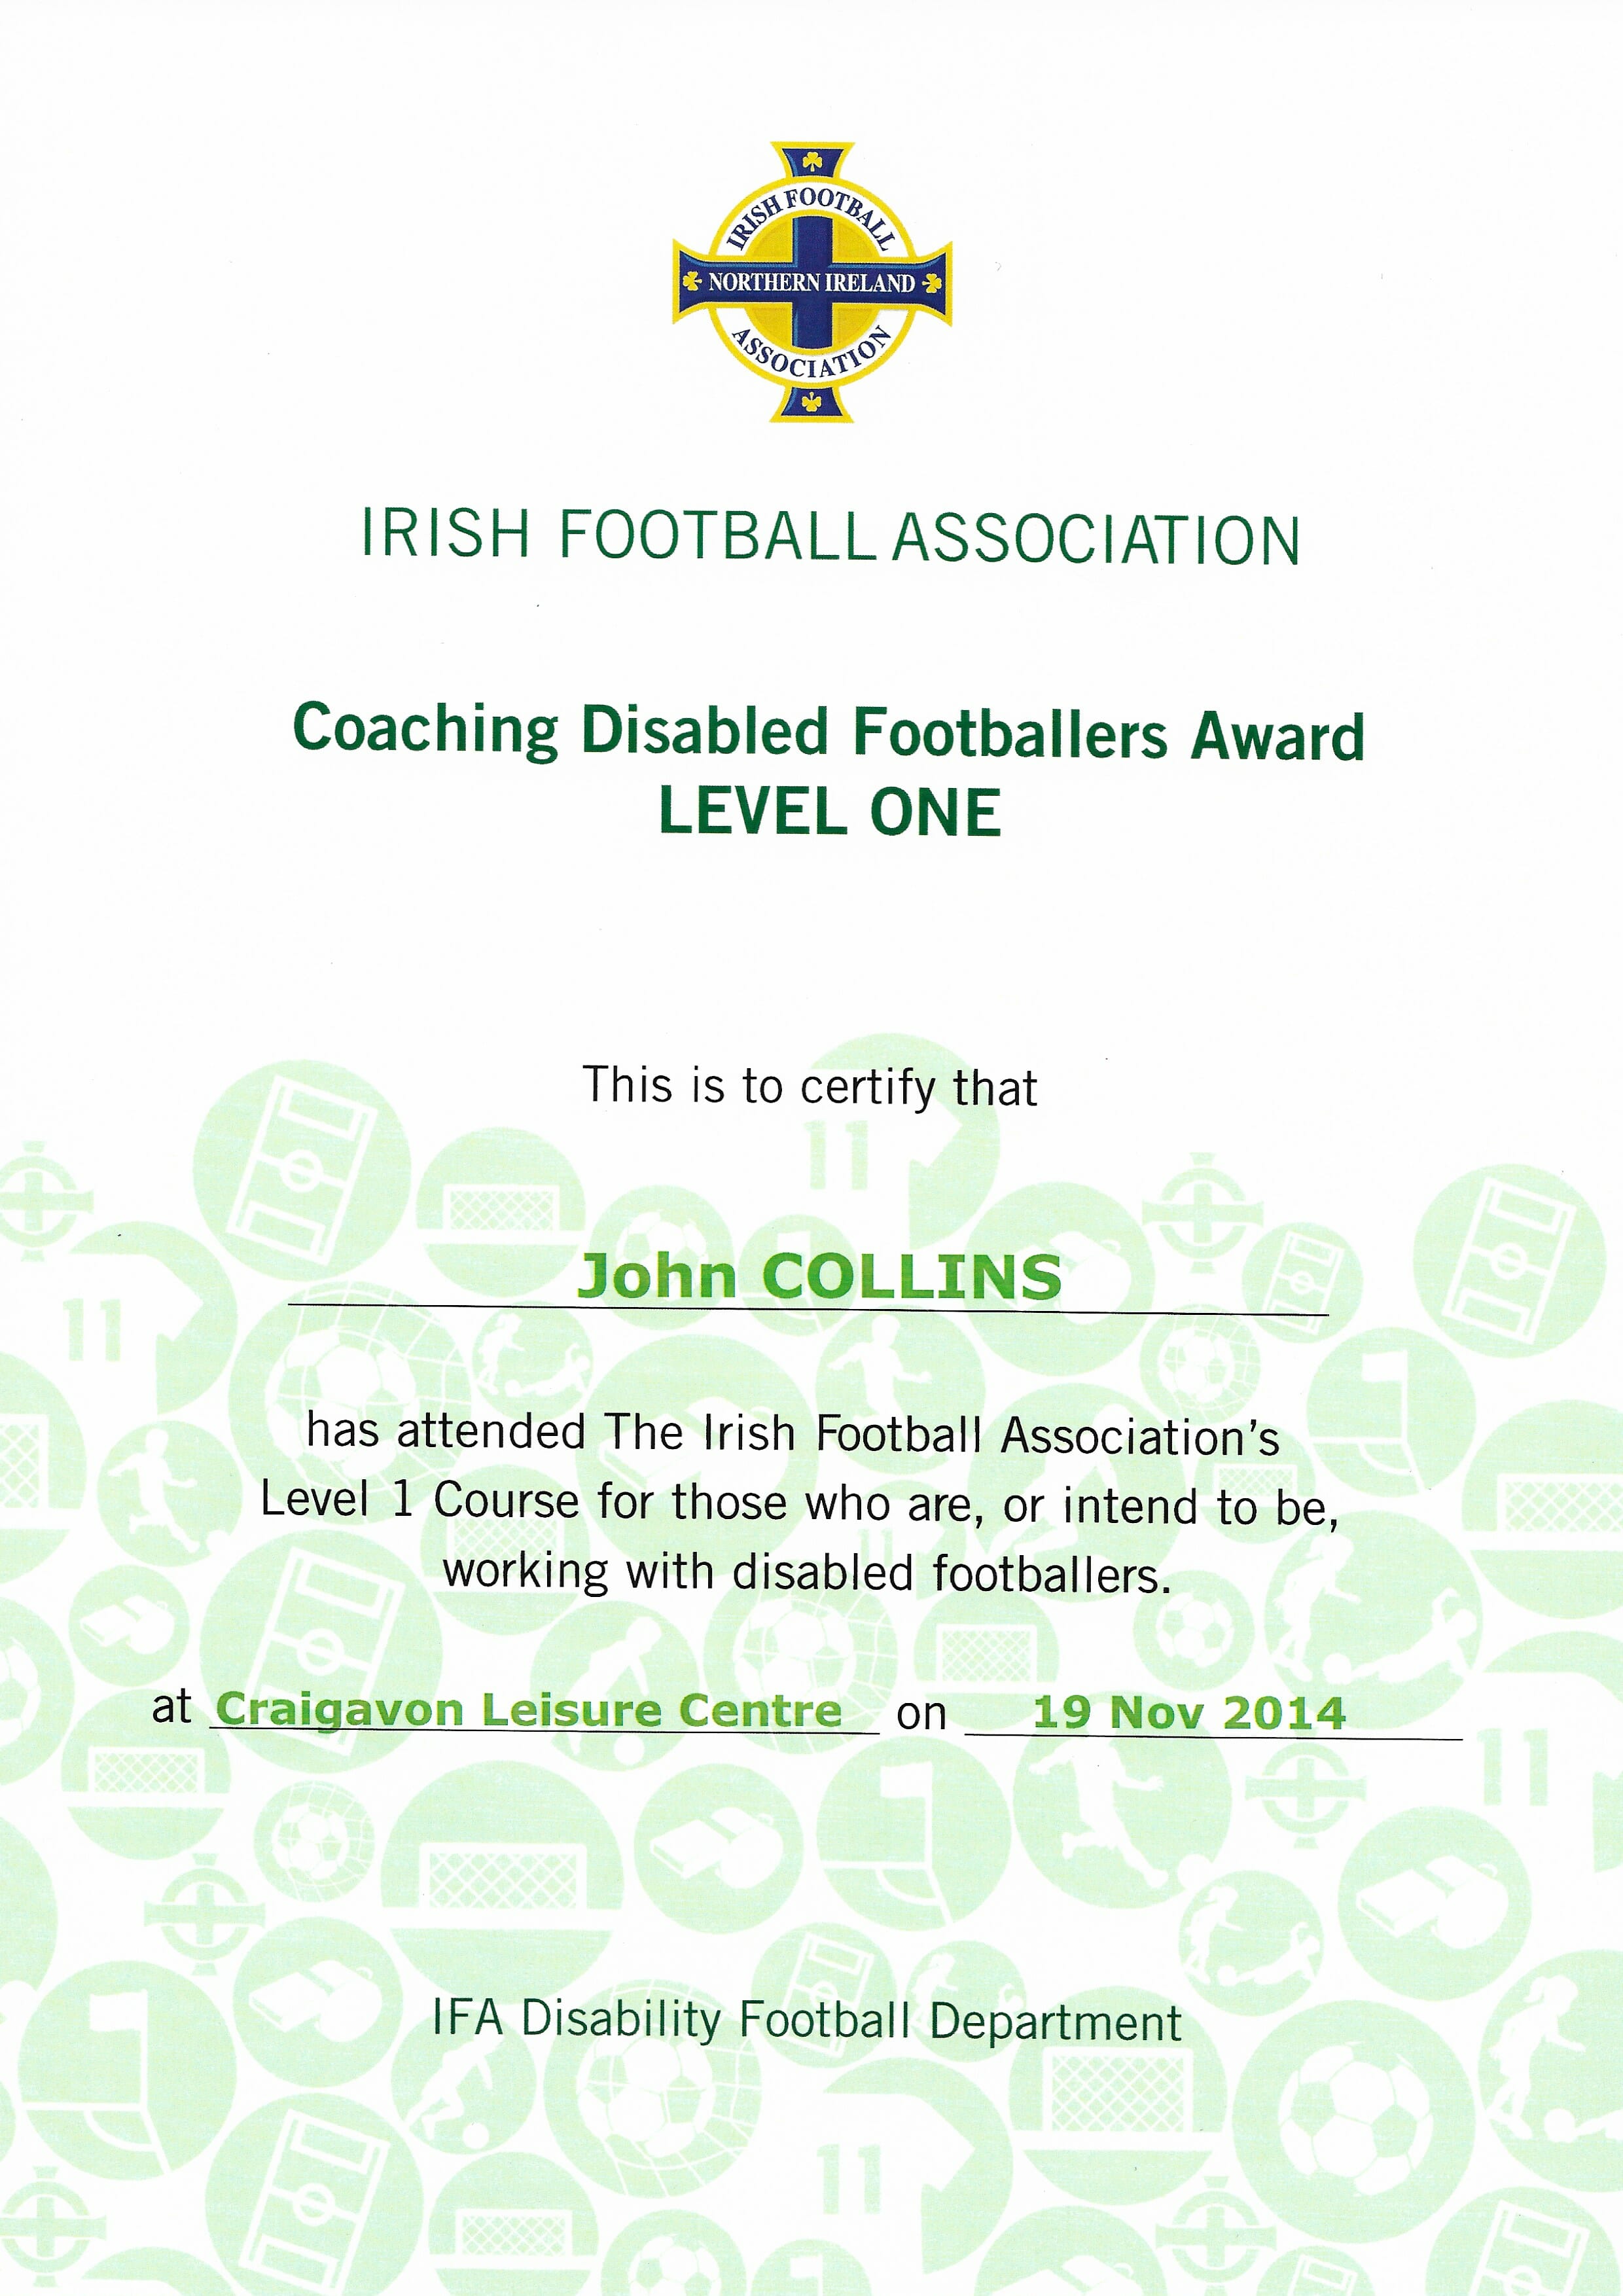 Coaching Disabled Footballers